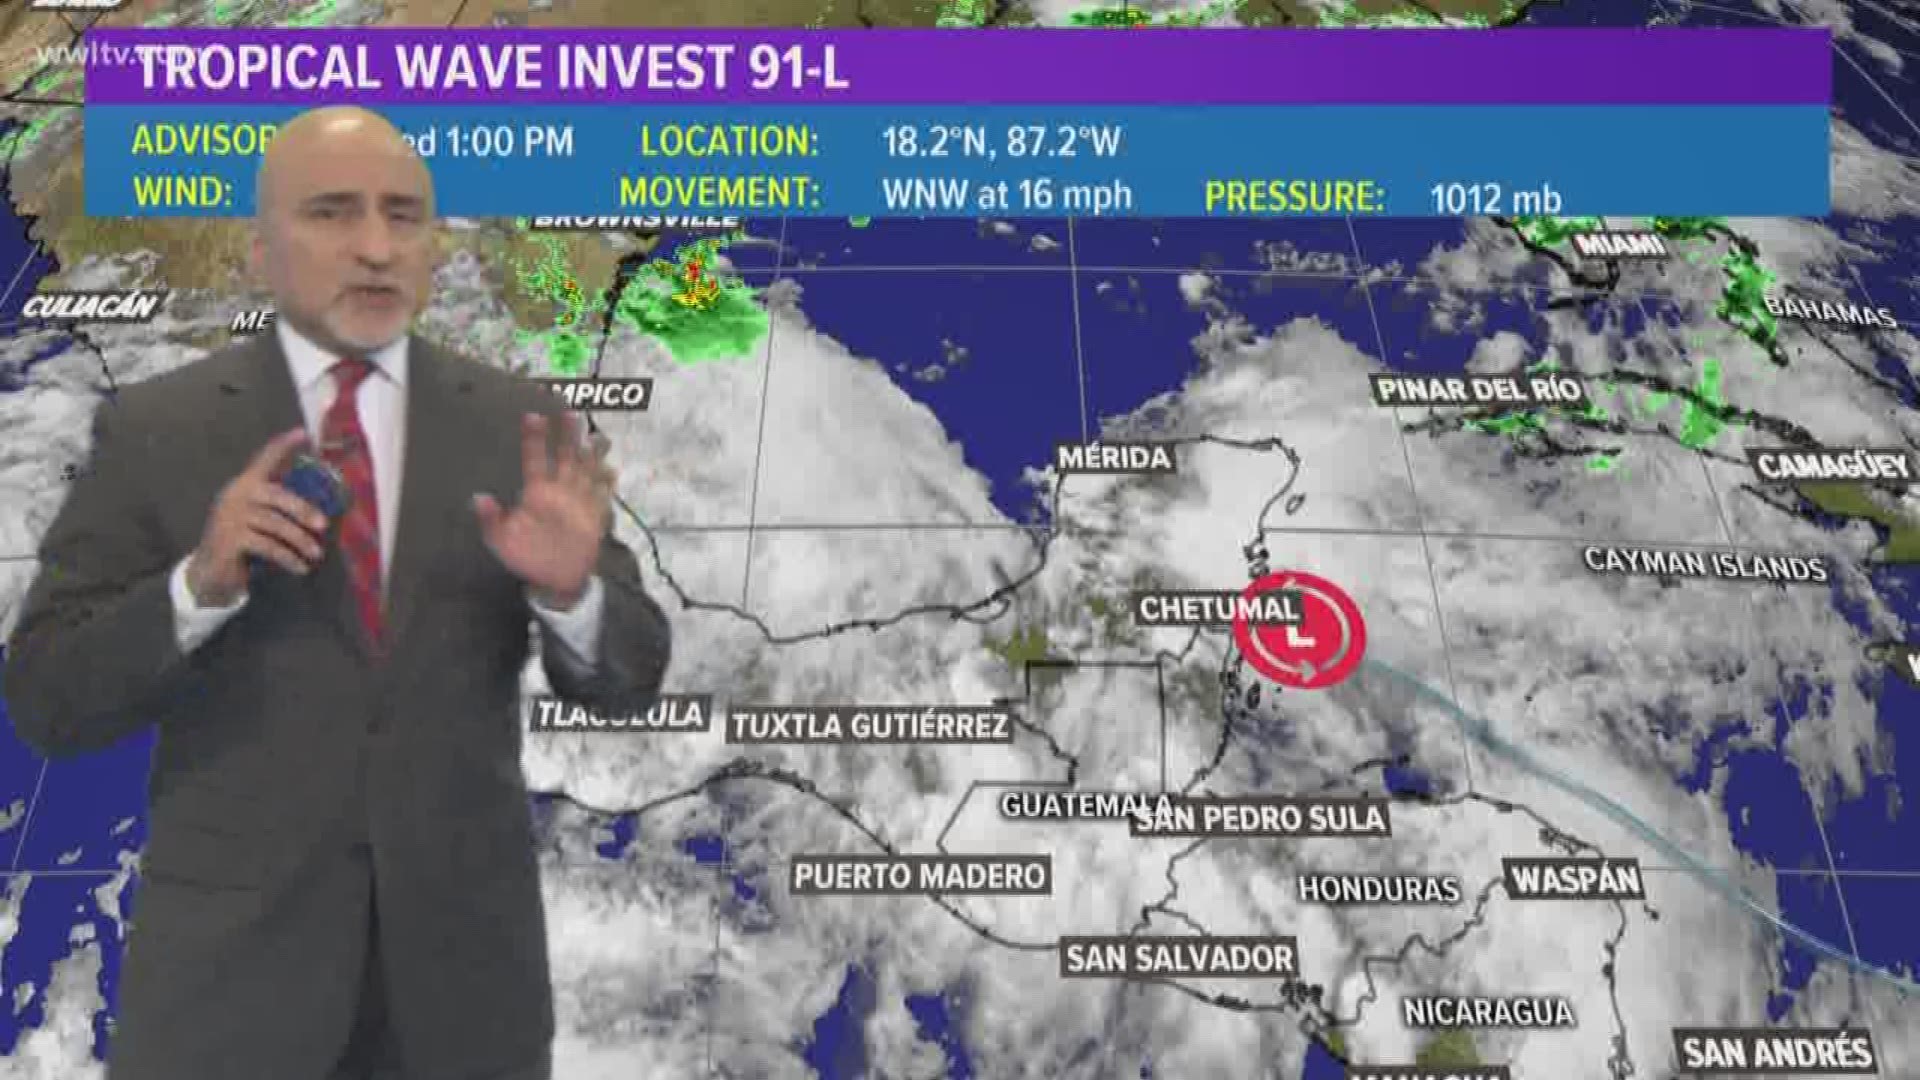 Chief meteorologist Carl Arredondo in the Wednesday evening tropical update.